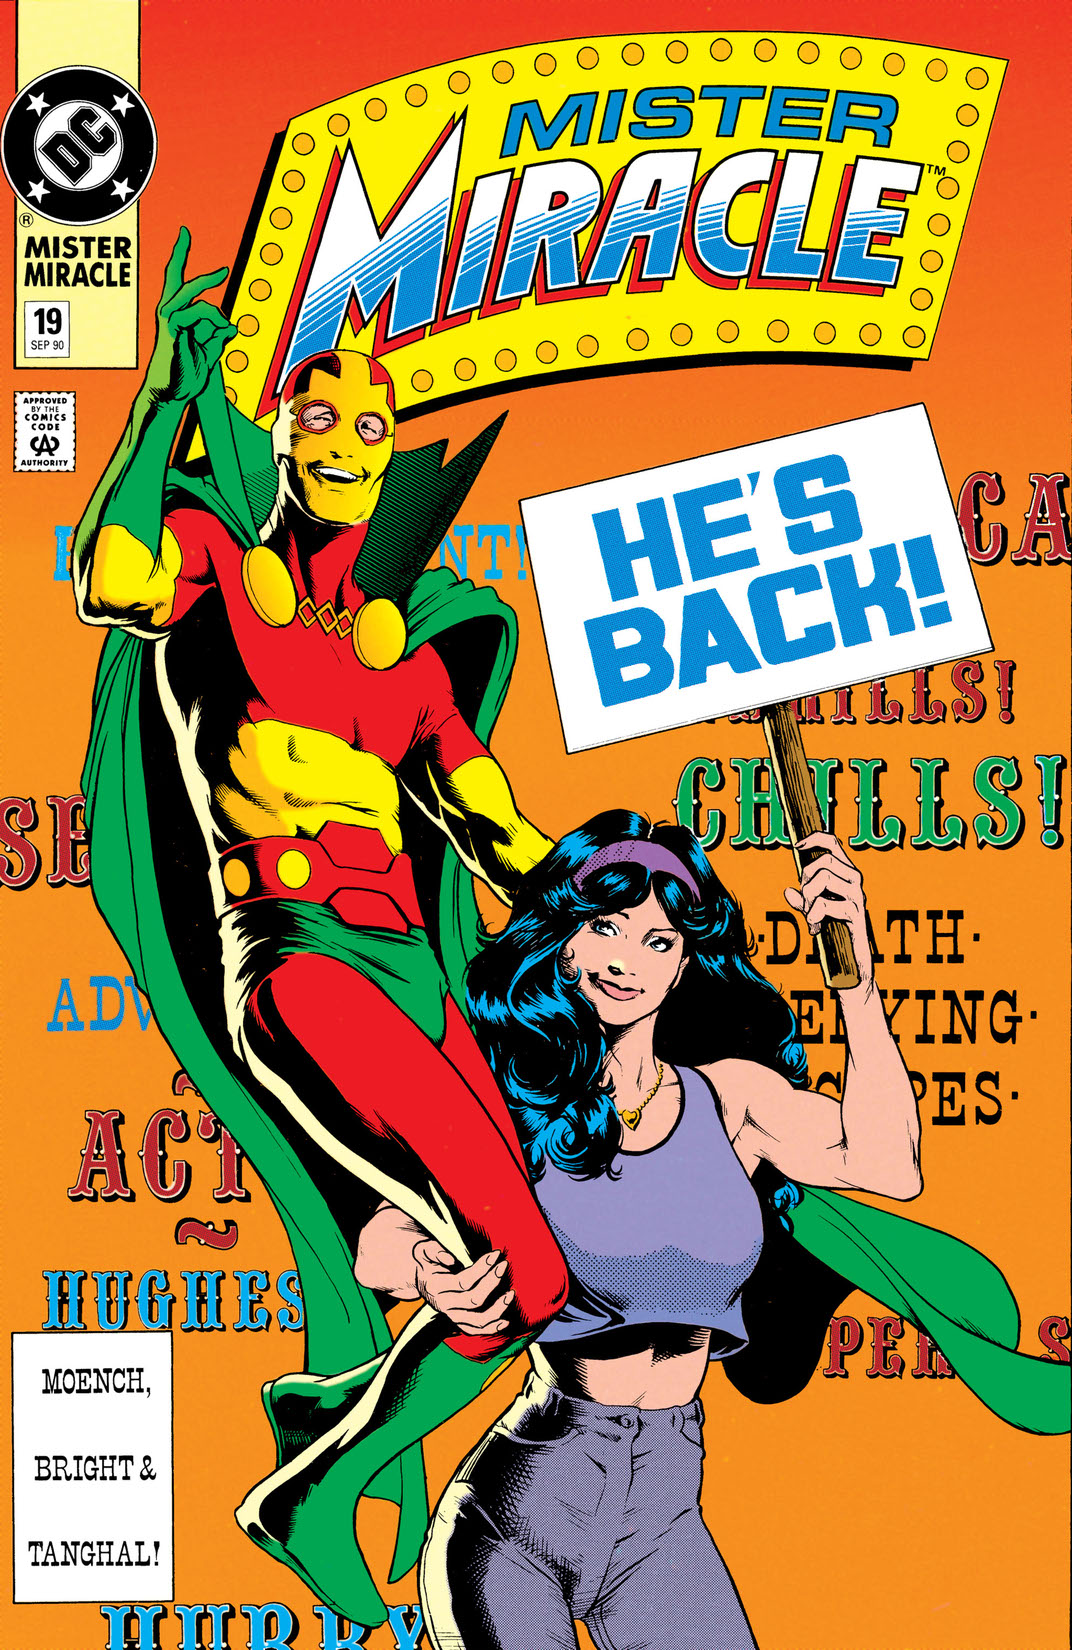 Mister Miracle (1988-) #19 preview images